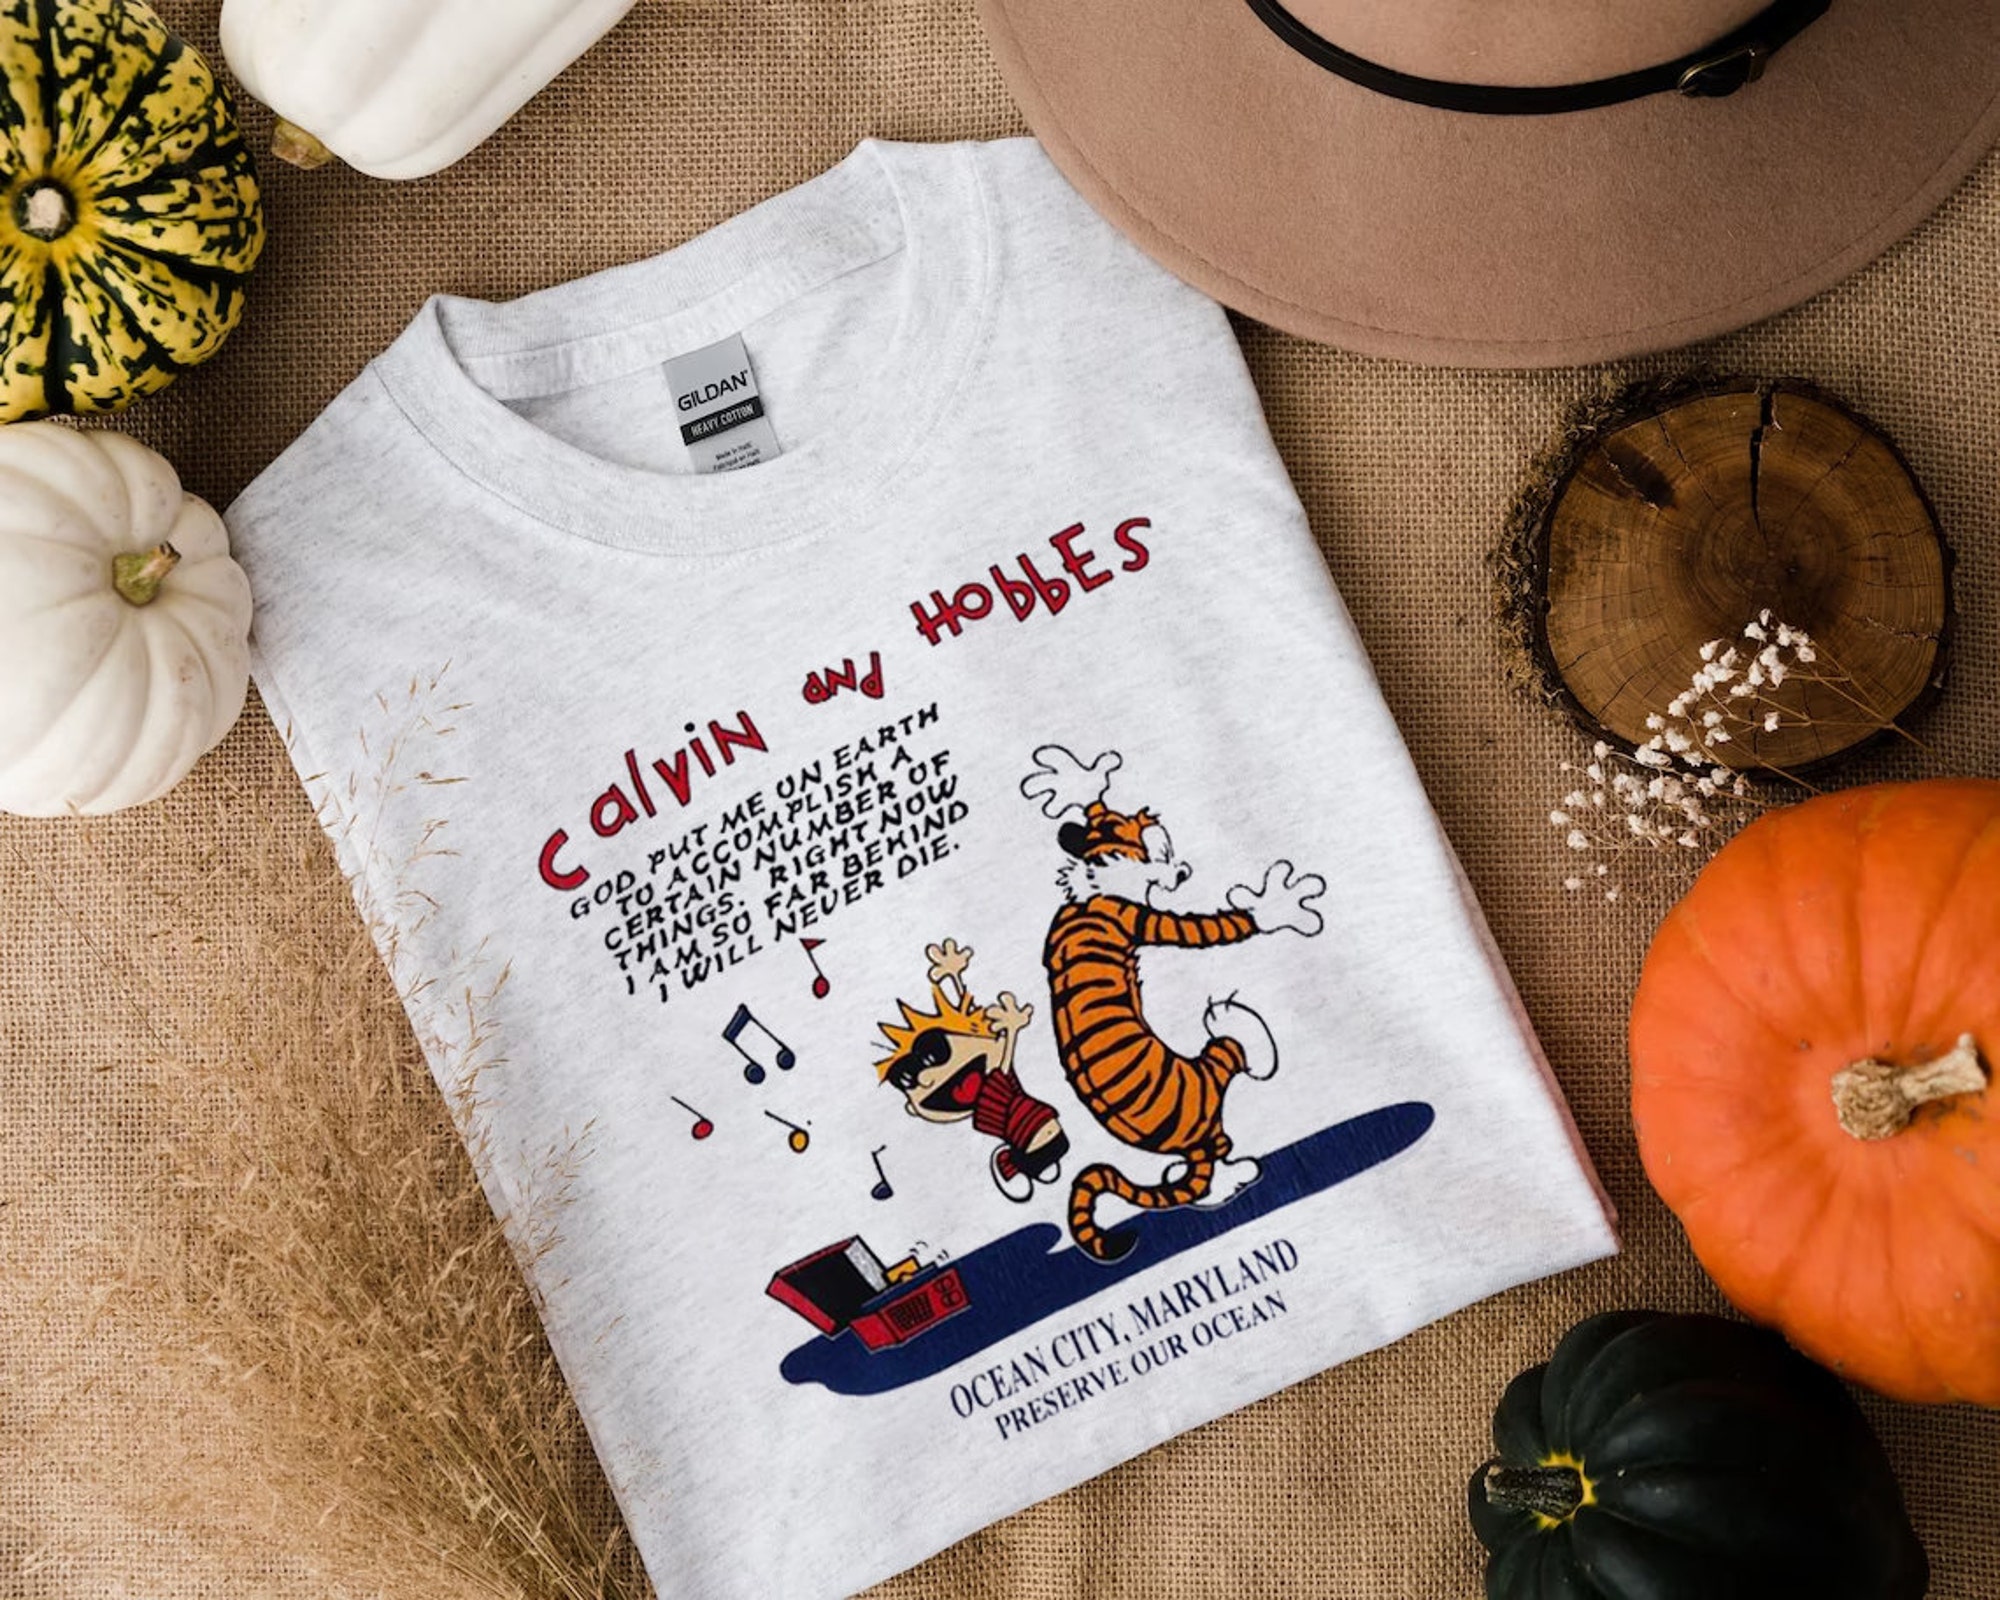 Discover Vintage Calvin And hobbes Music Box Shirt, God Put Me On Earth To Accomplish A Certain Number Of Things